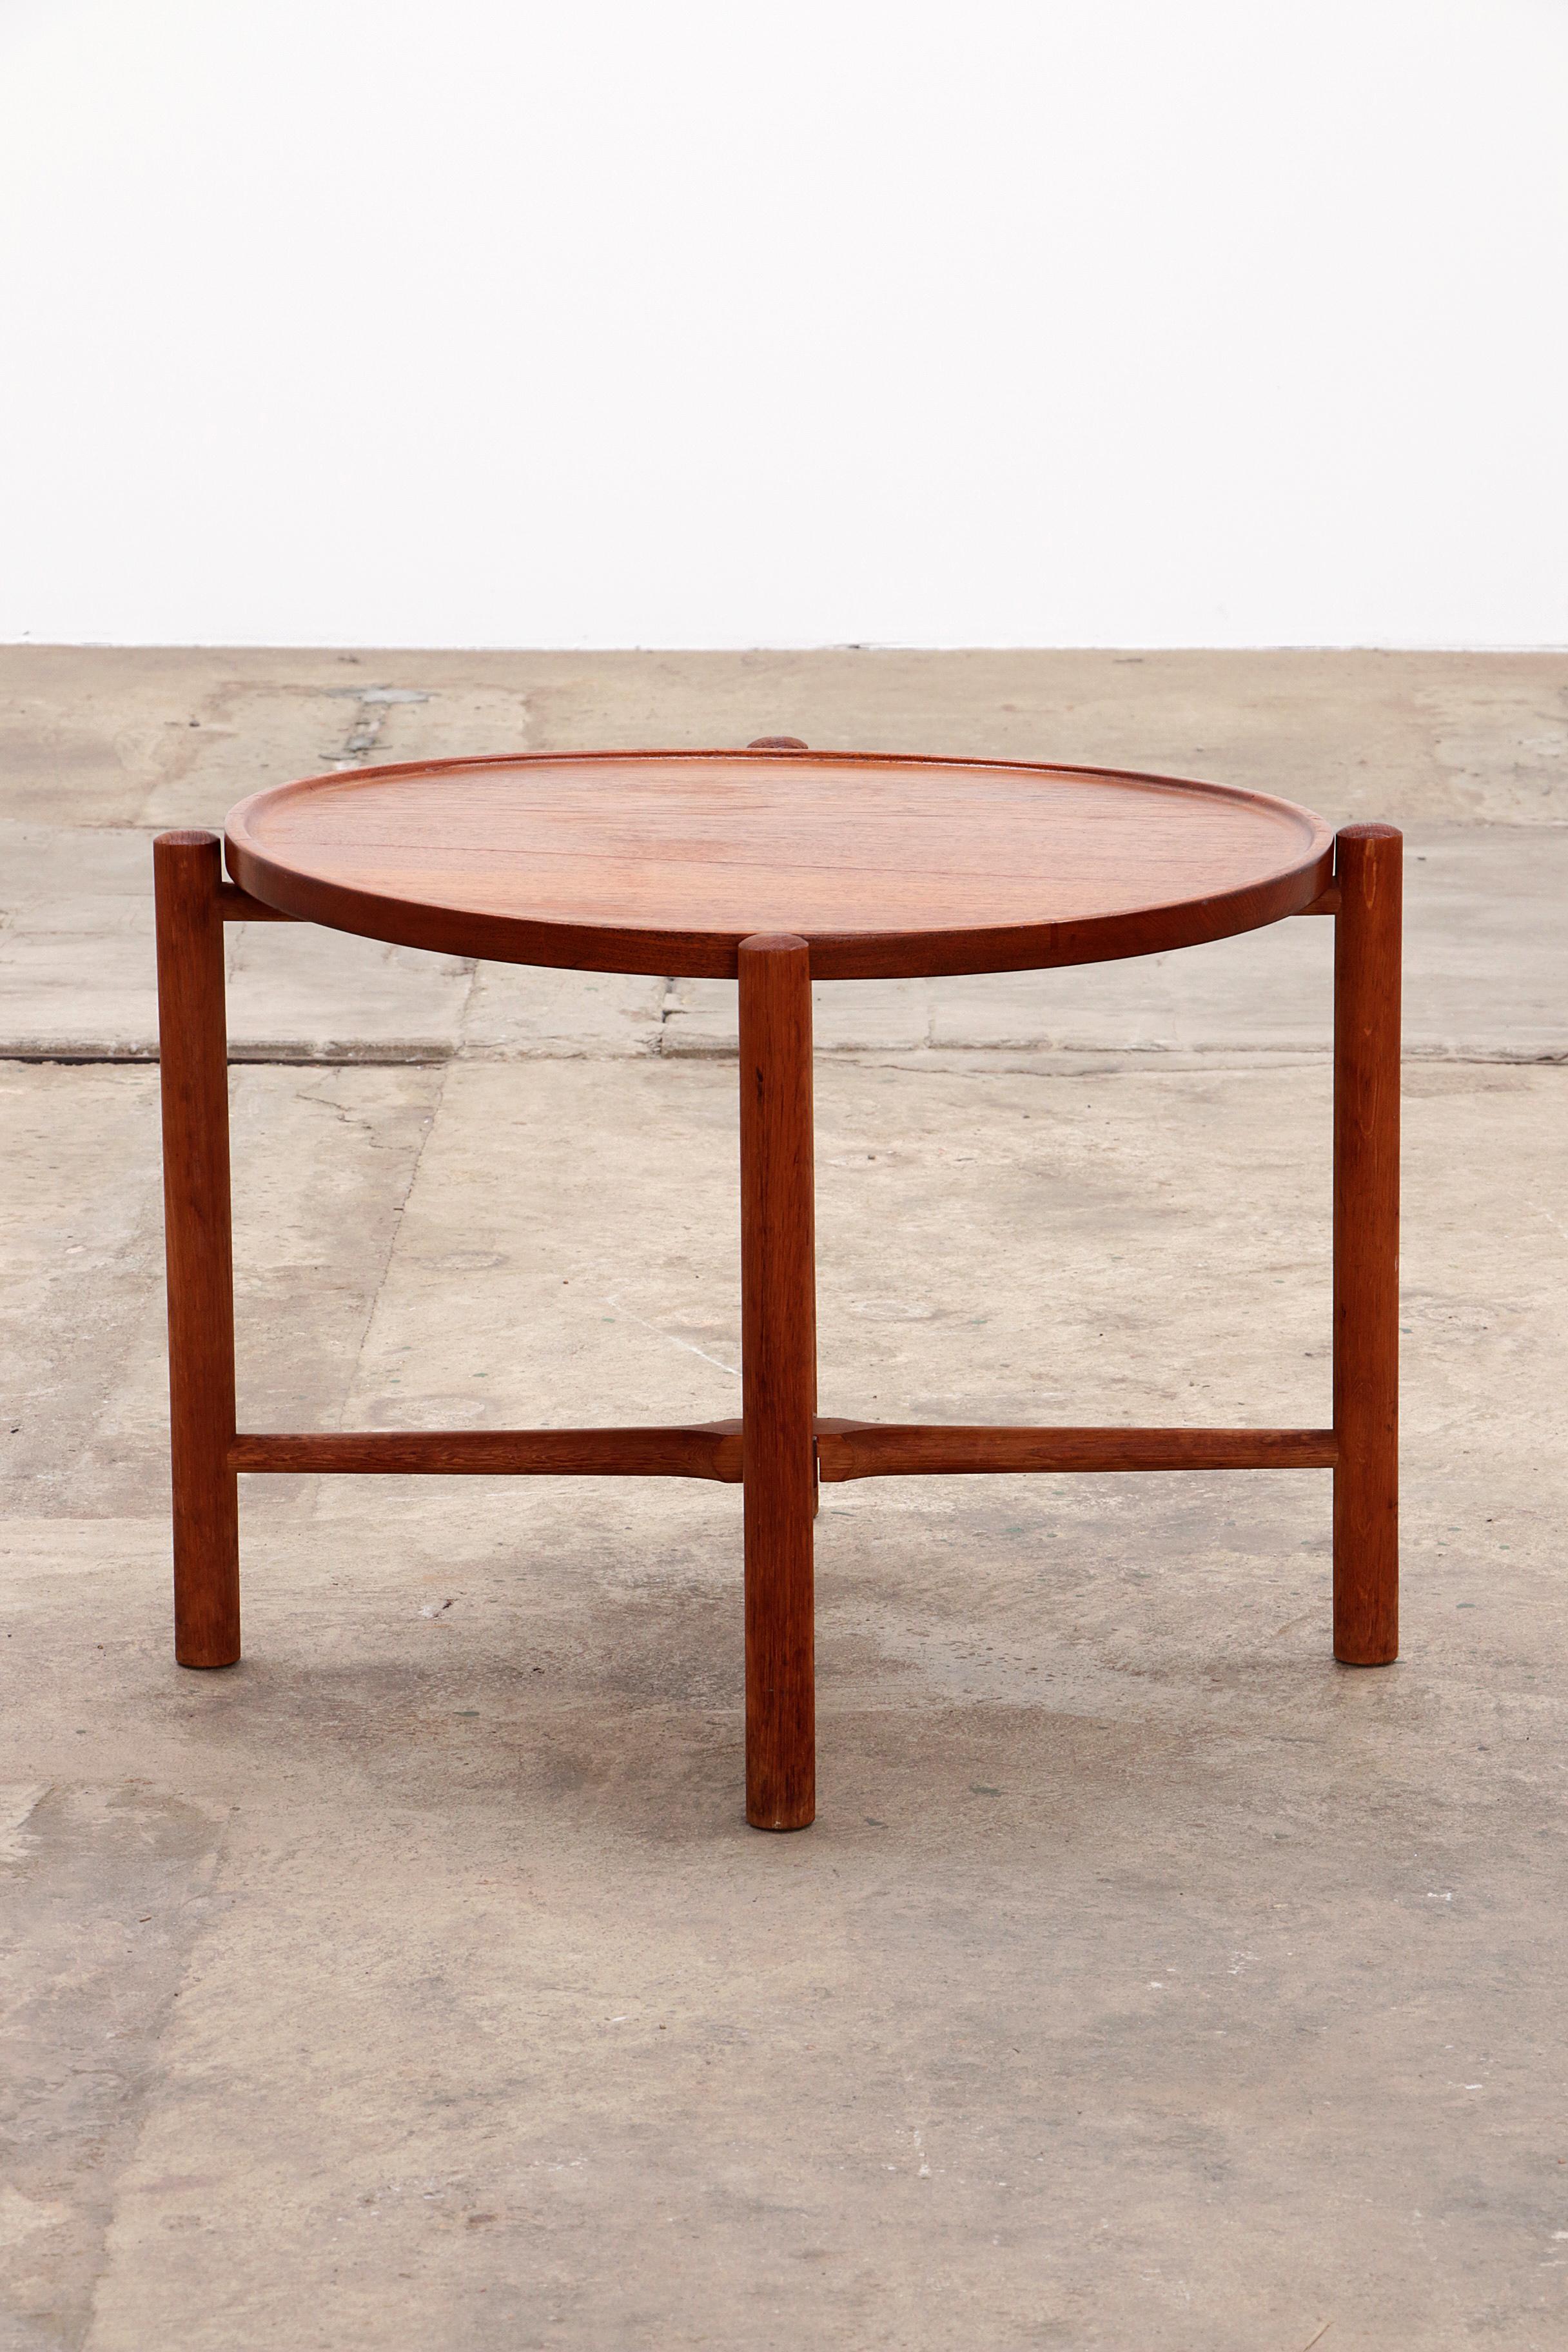 Side table Model AT35 design by Hans J. Wegner,1945 Denmark


Side table model AT35 designed by Hans J. Wegner in 1945 for Andreas Tuck.

This is a very early model and belongs to the first editions of the well-known designer.

The table has the